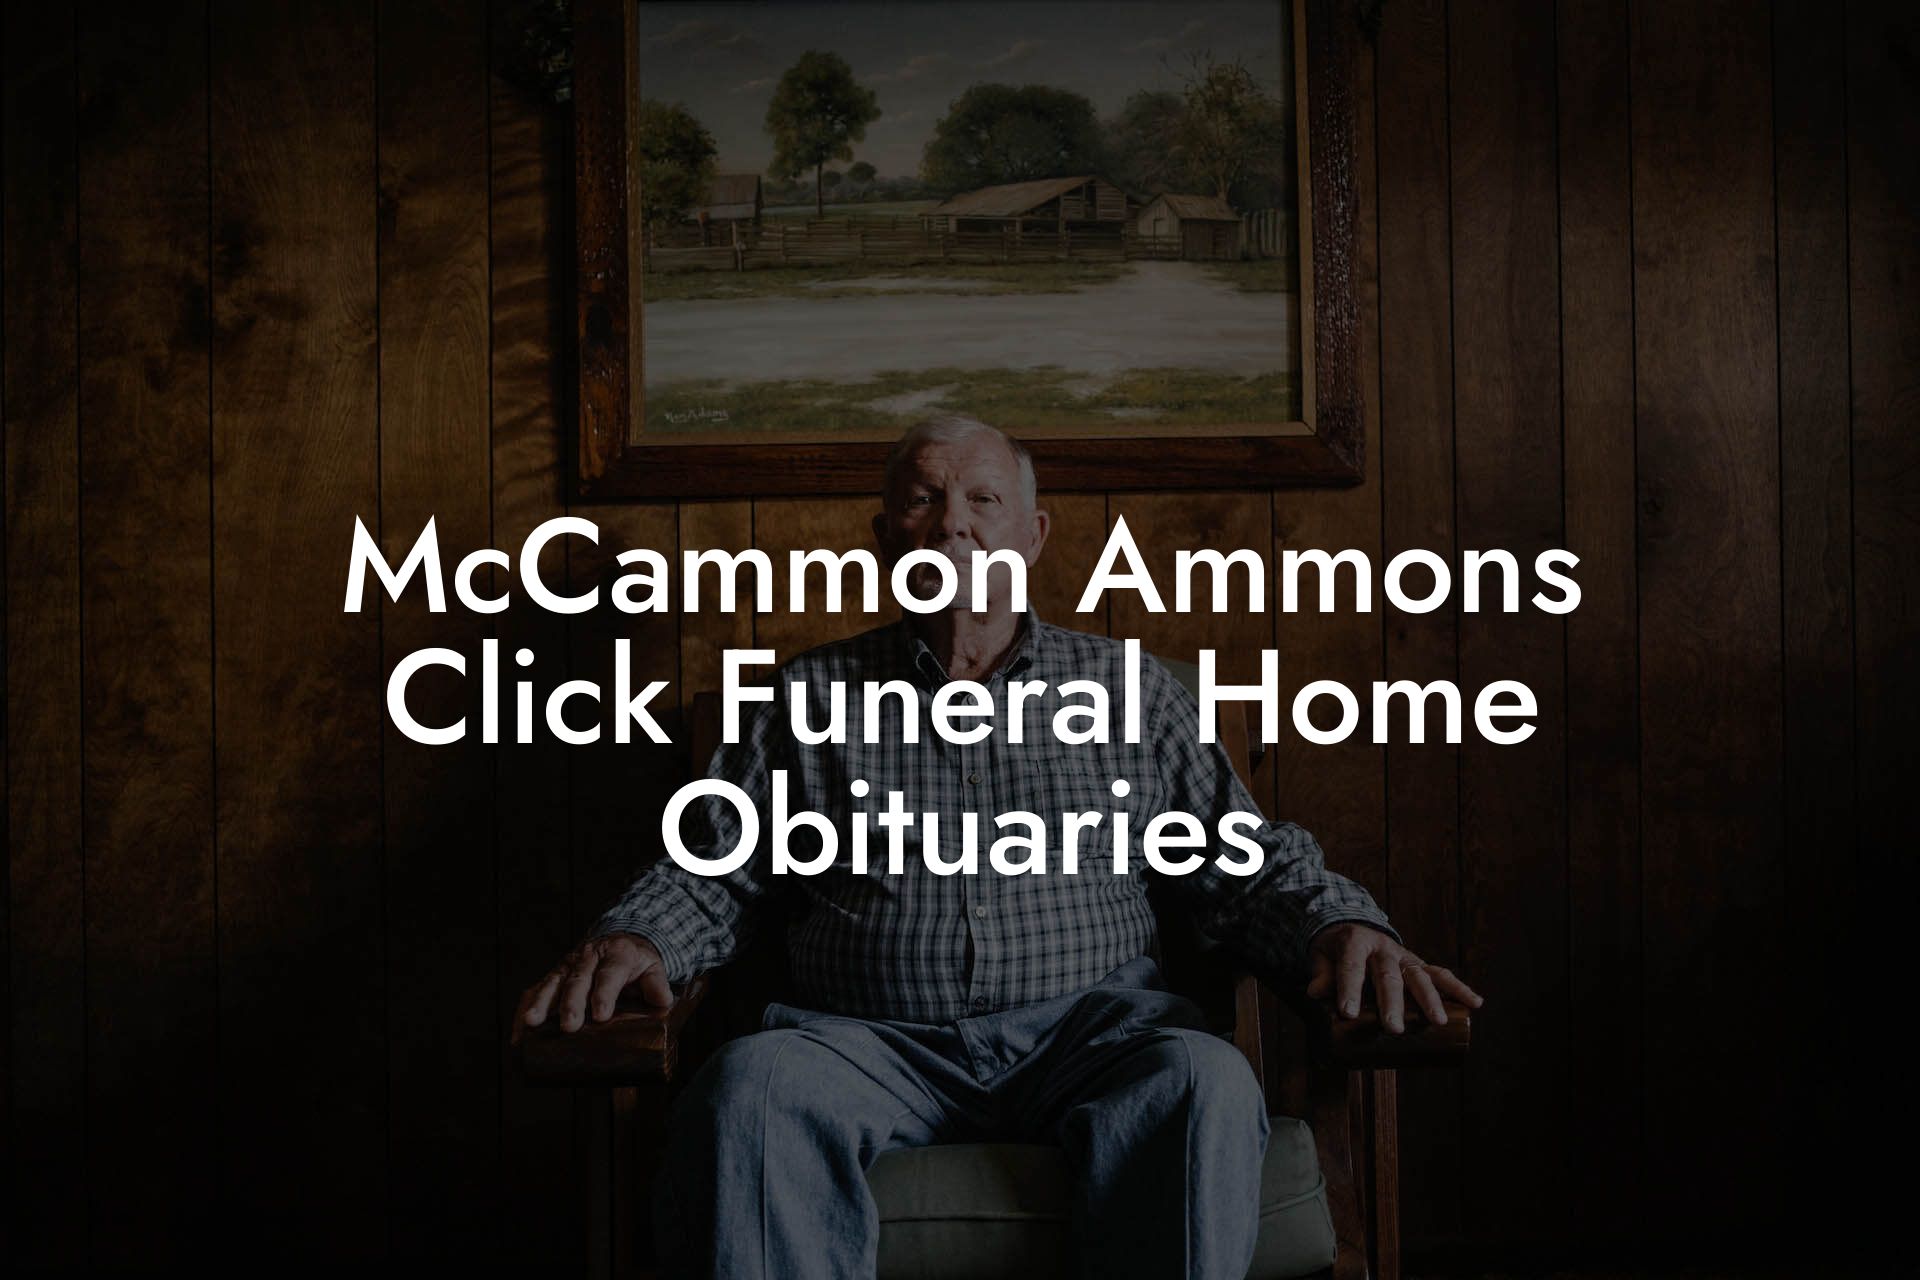 McCammon Ammons Click Funeral Home Obituaries